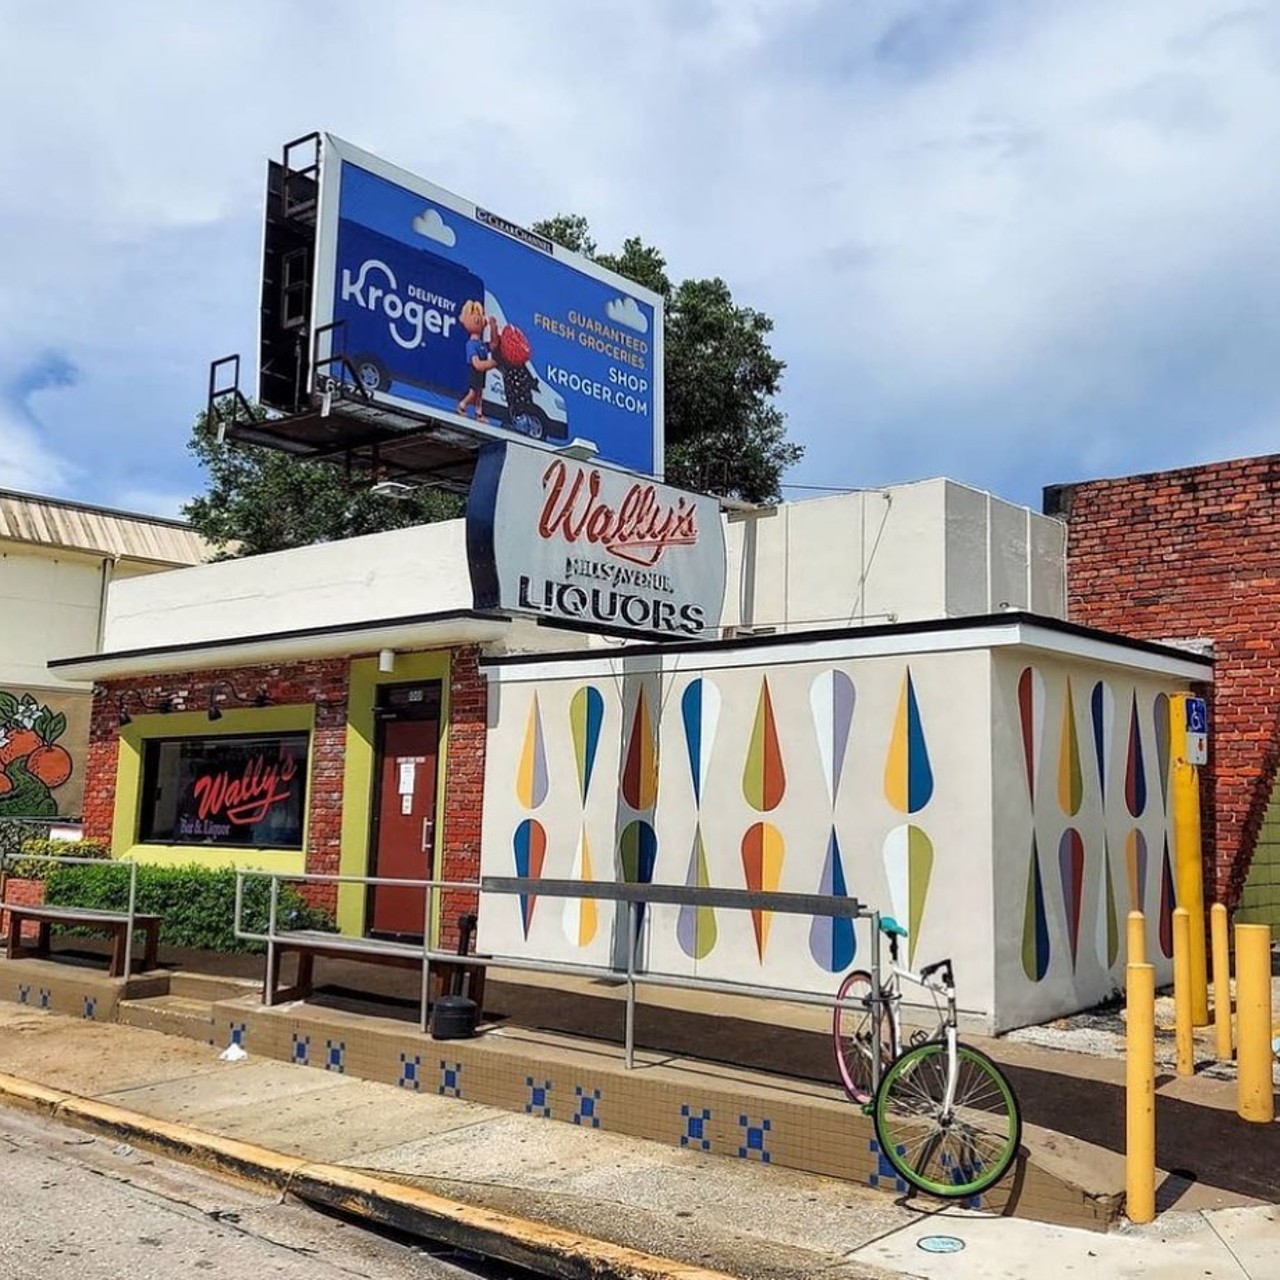 Wally&#146;s Bar and Liquors 
1001 N Mills Ave, Orlando, FL 32803, (407) 440-2800
Wally&#146;s is known as the best dive bar in Orlando based on the feedback of our readers. It came by its classic jukebox honestly, it&#146;s been serving Orlando since 1954.
Photo via Wally&#146;s Bar and Liquors/Facebook